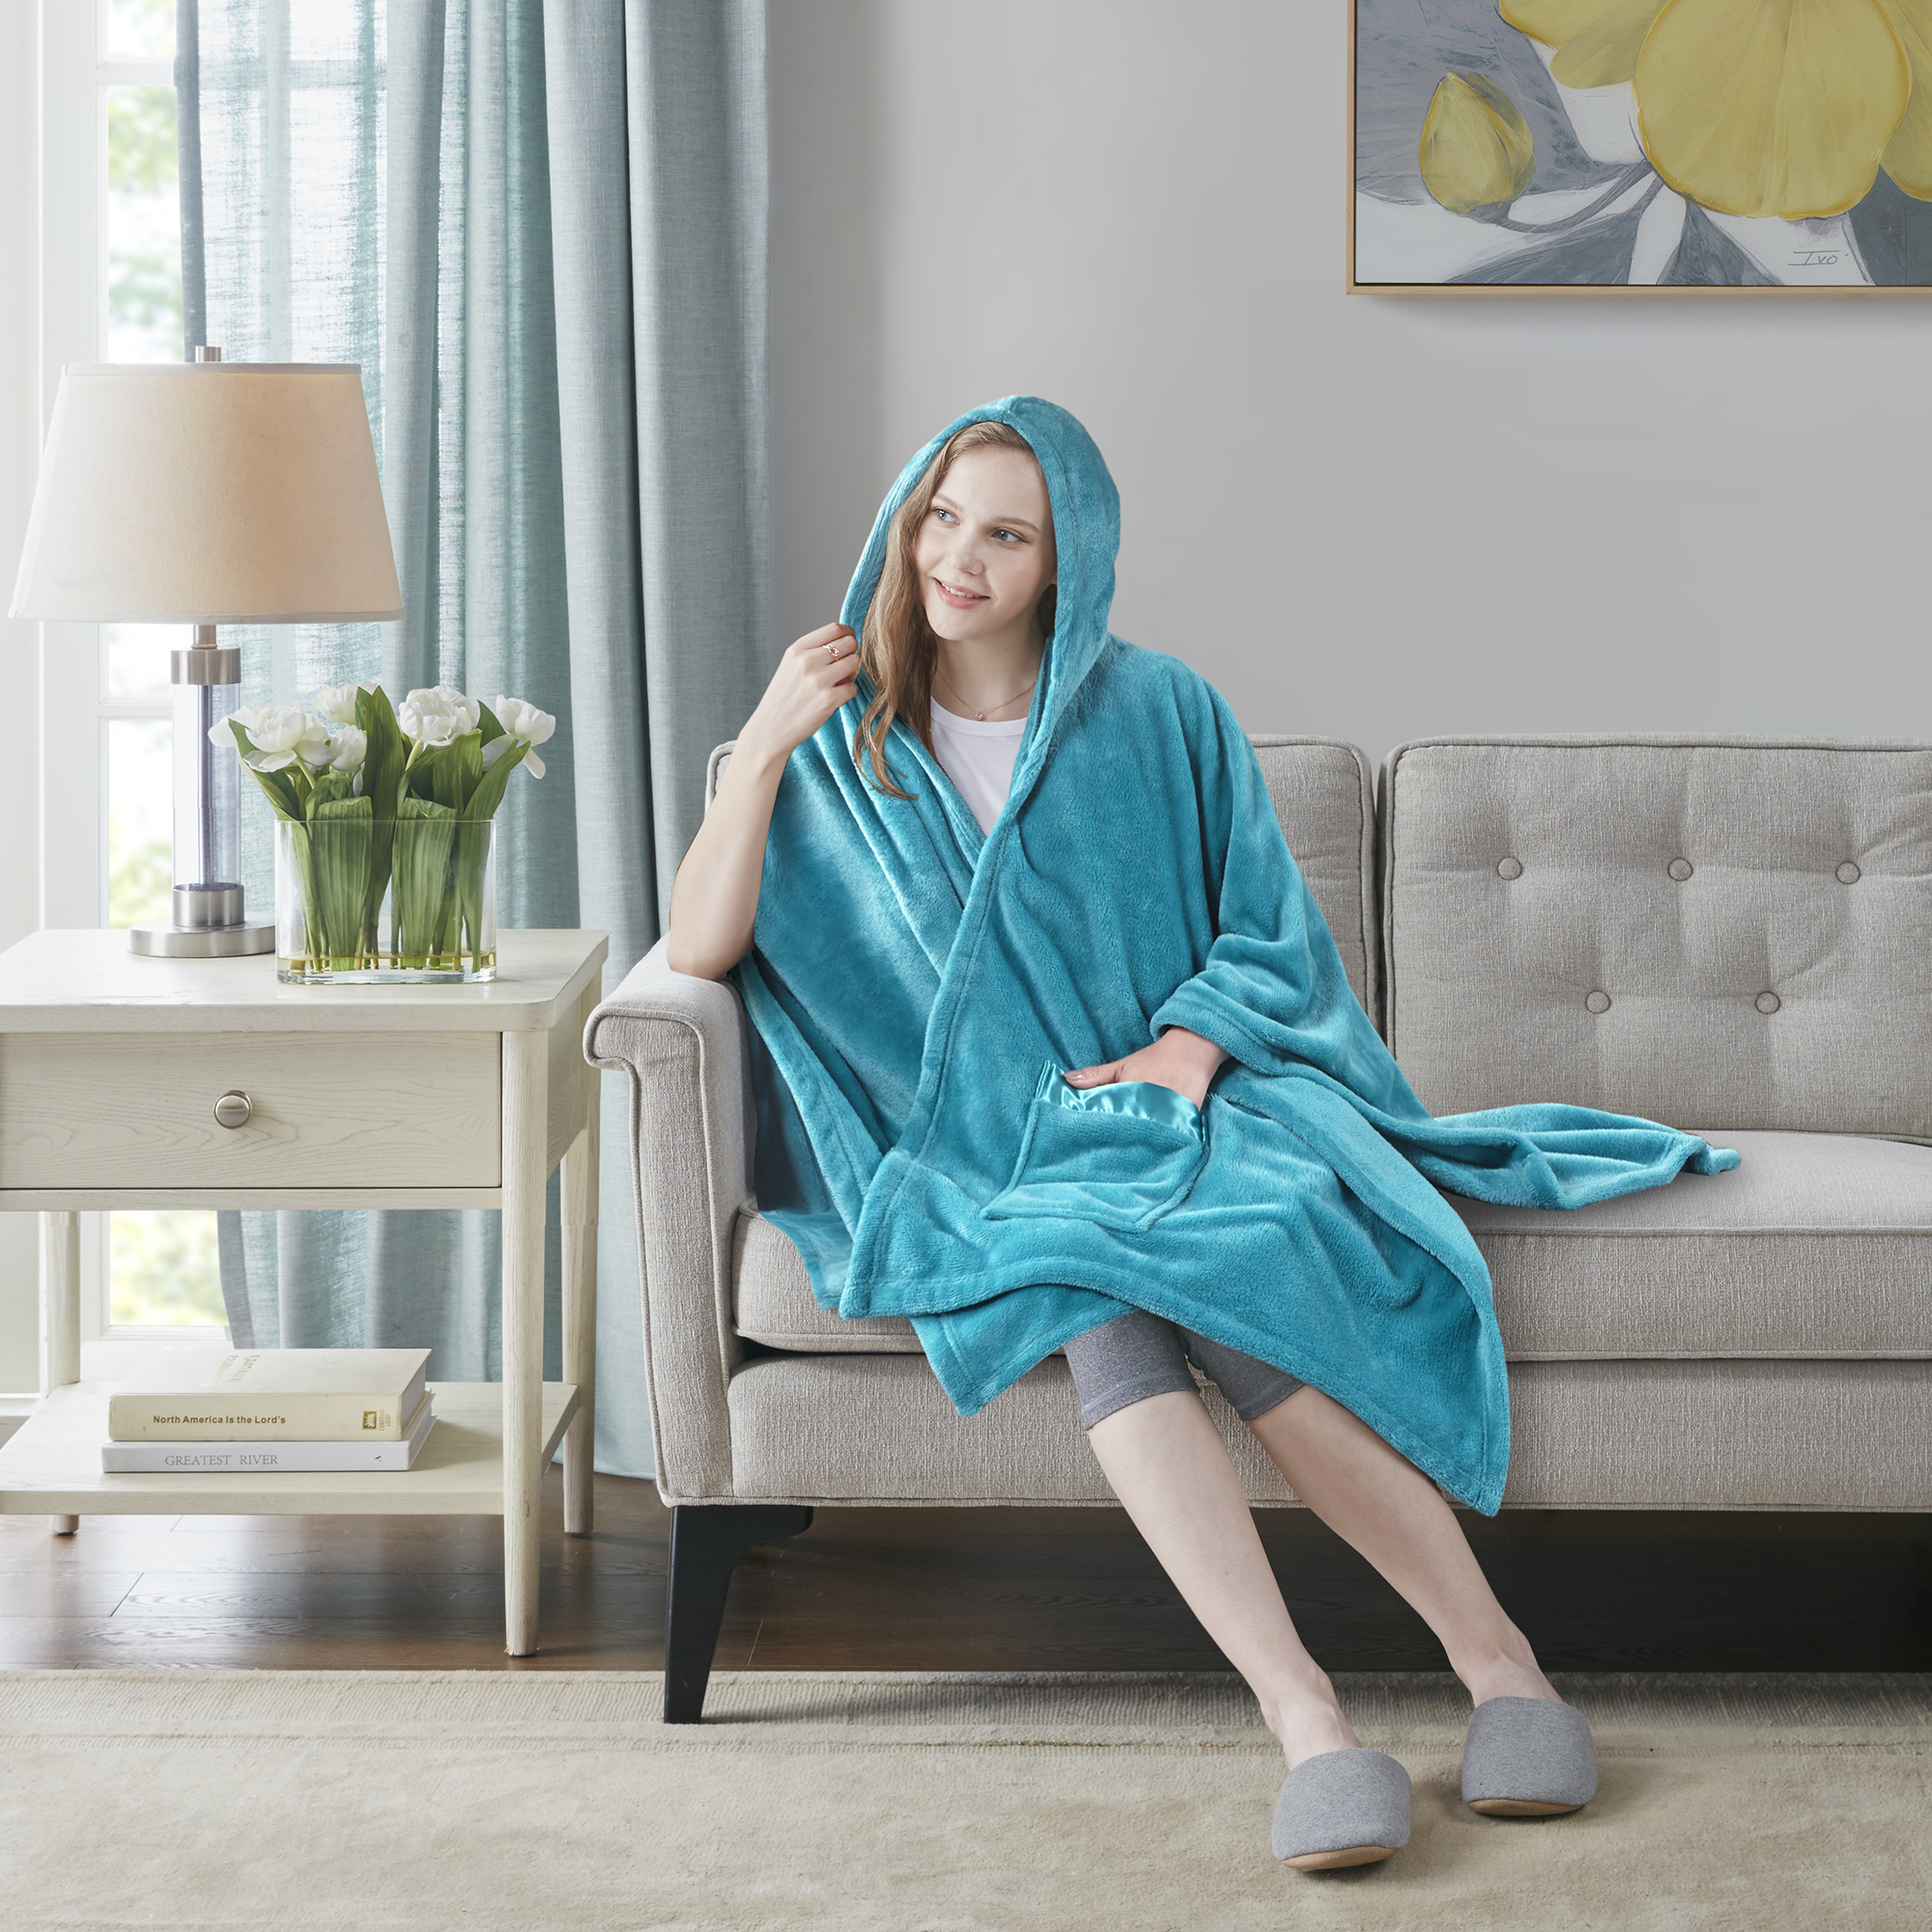 Comfort Spaces Teal Blue Polyester Plush Throw Blanket, Standard Throw - image 3 of 9